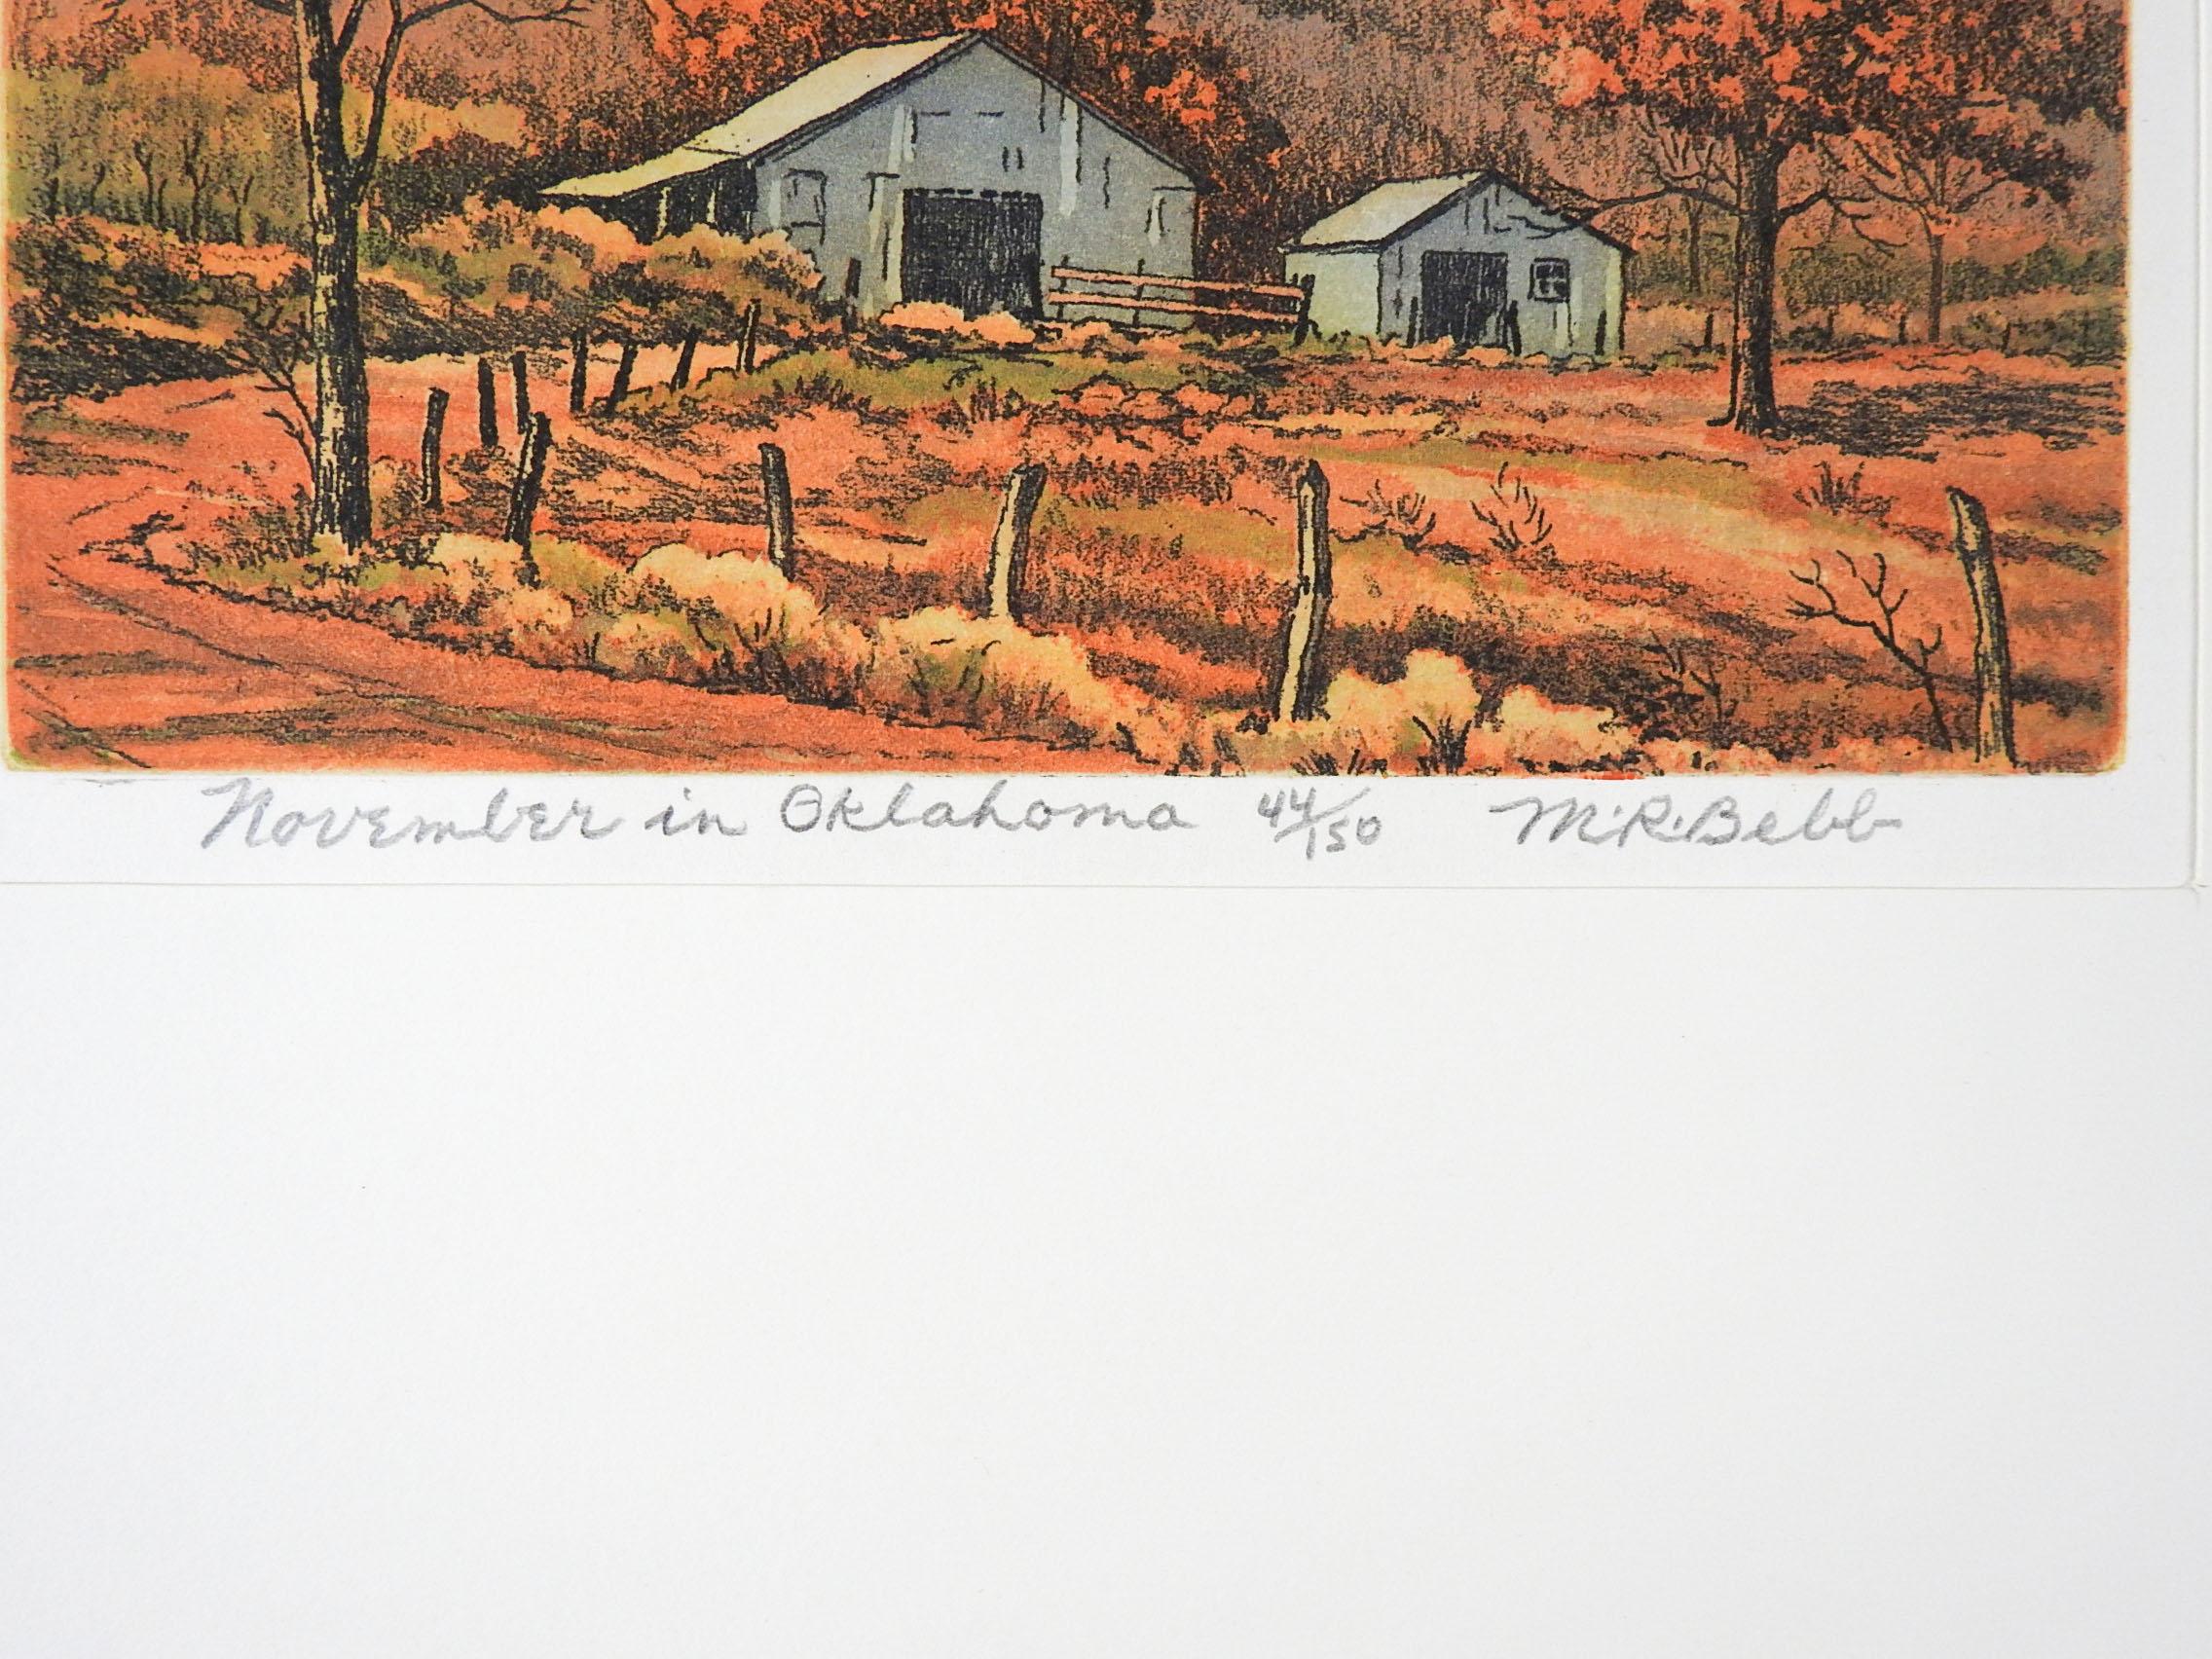 Vintage circa 1950's Maurice R. Bebbs (1891-1985) aquatint etching on paper. Signed, titled November in Oklahoma, numbered 44/150 in pencil along lower margin. Unframed, displayed in folded cardstock mat, opening size 7.25